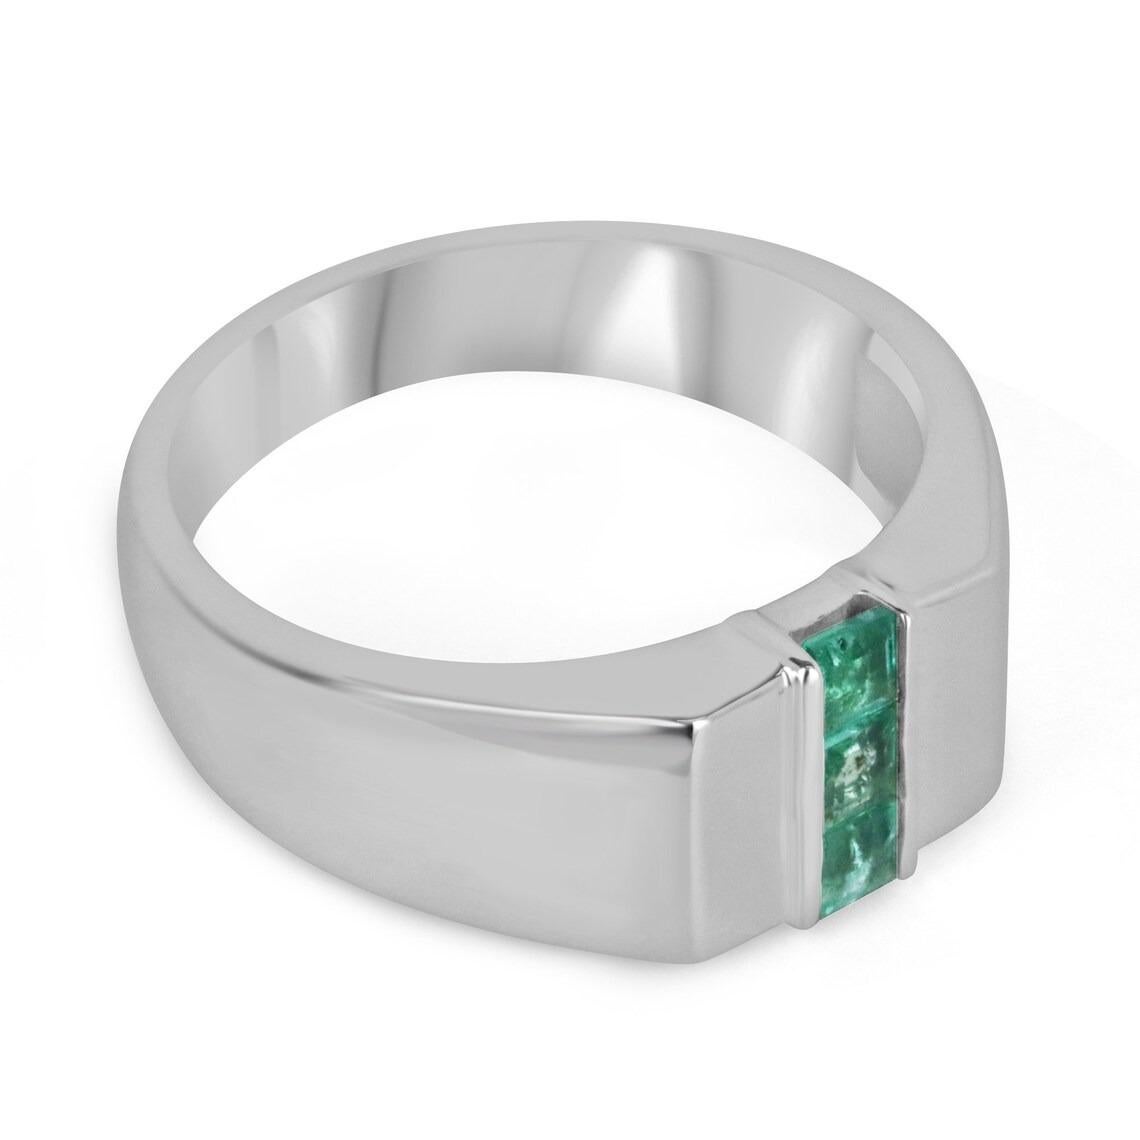 A dapper three-stone natural emerald men's ring that features three Asscher cut emeralds in the very center channel set north to south. The gemstones showcase a lovely medium green color with excellent-very good clarity and luster. Crafted in